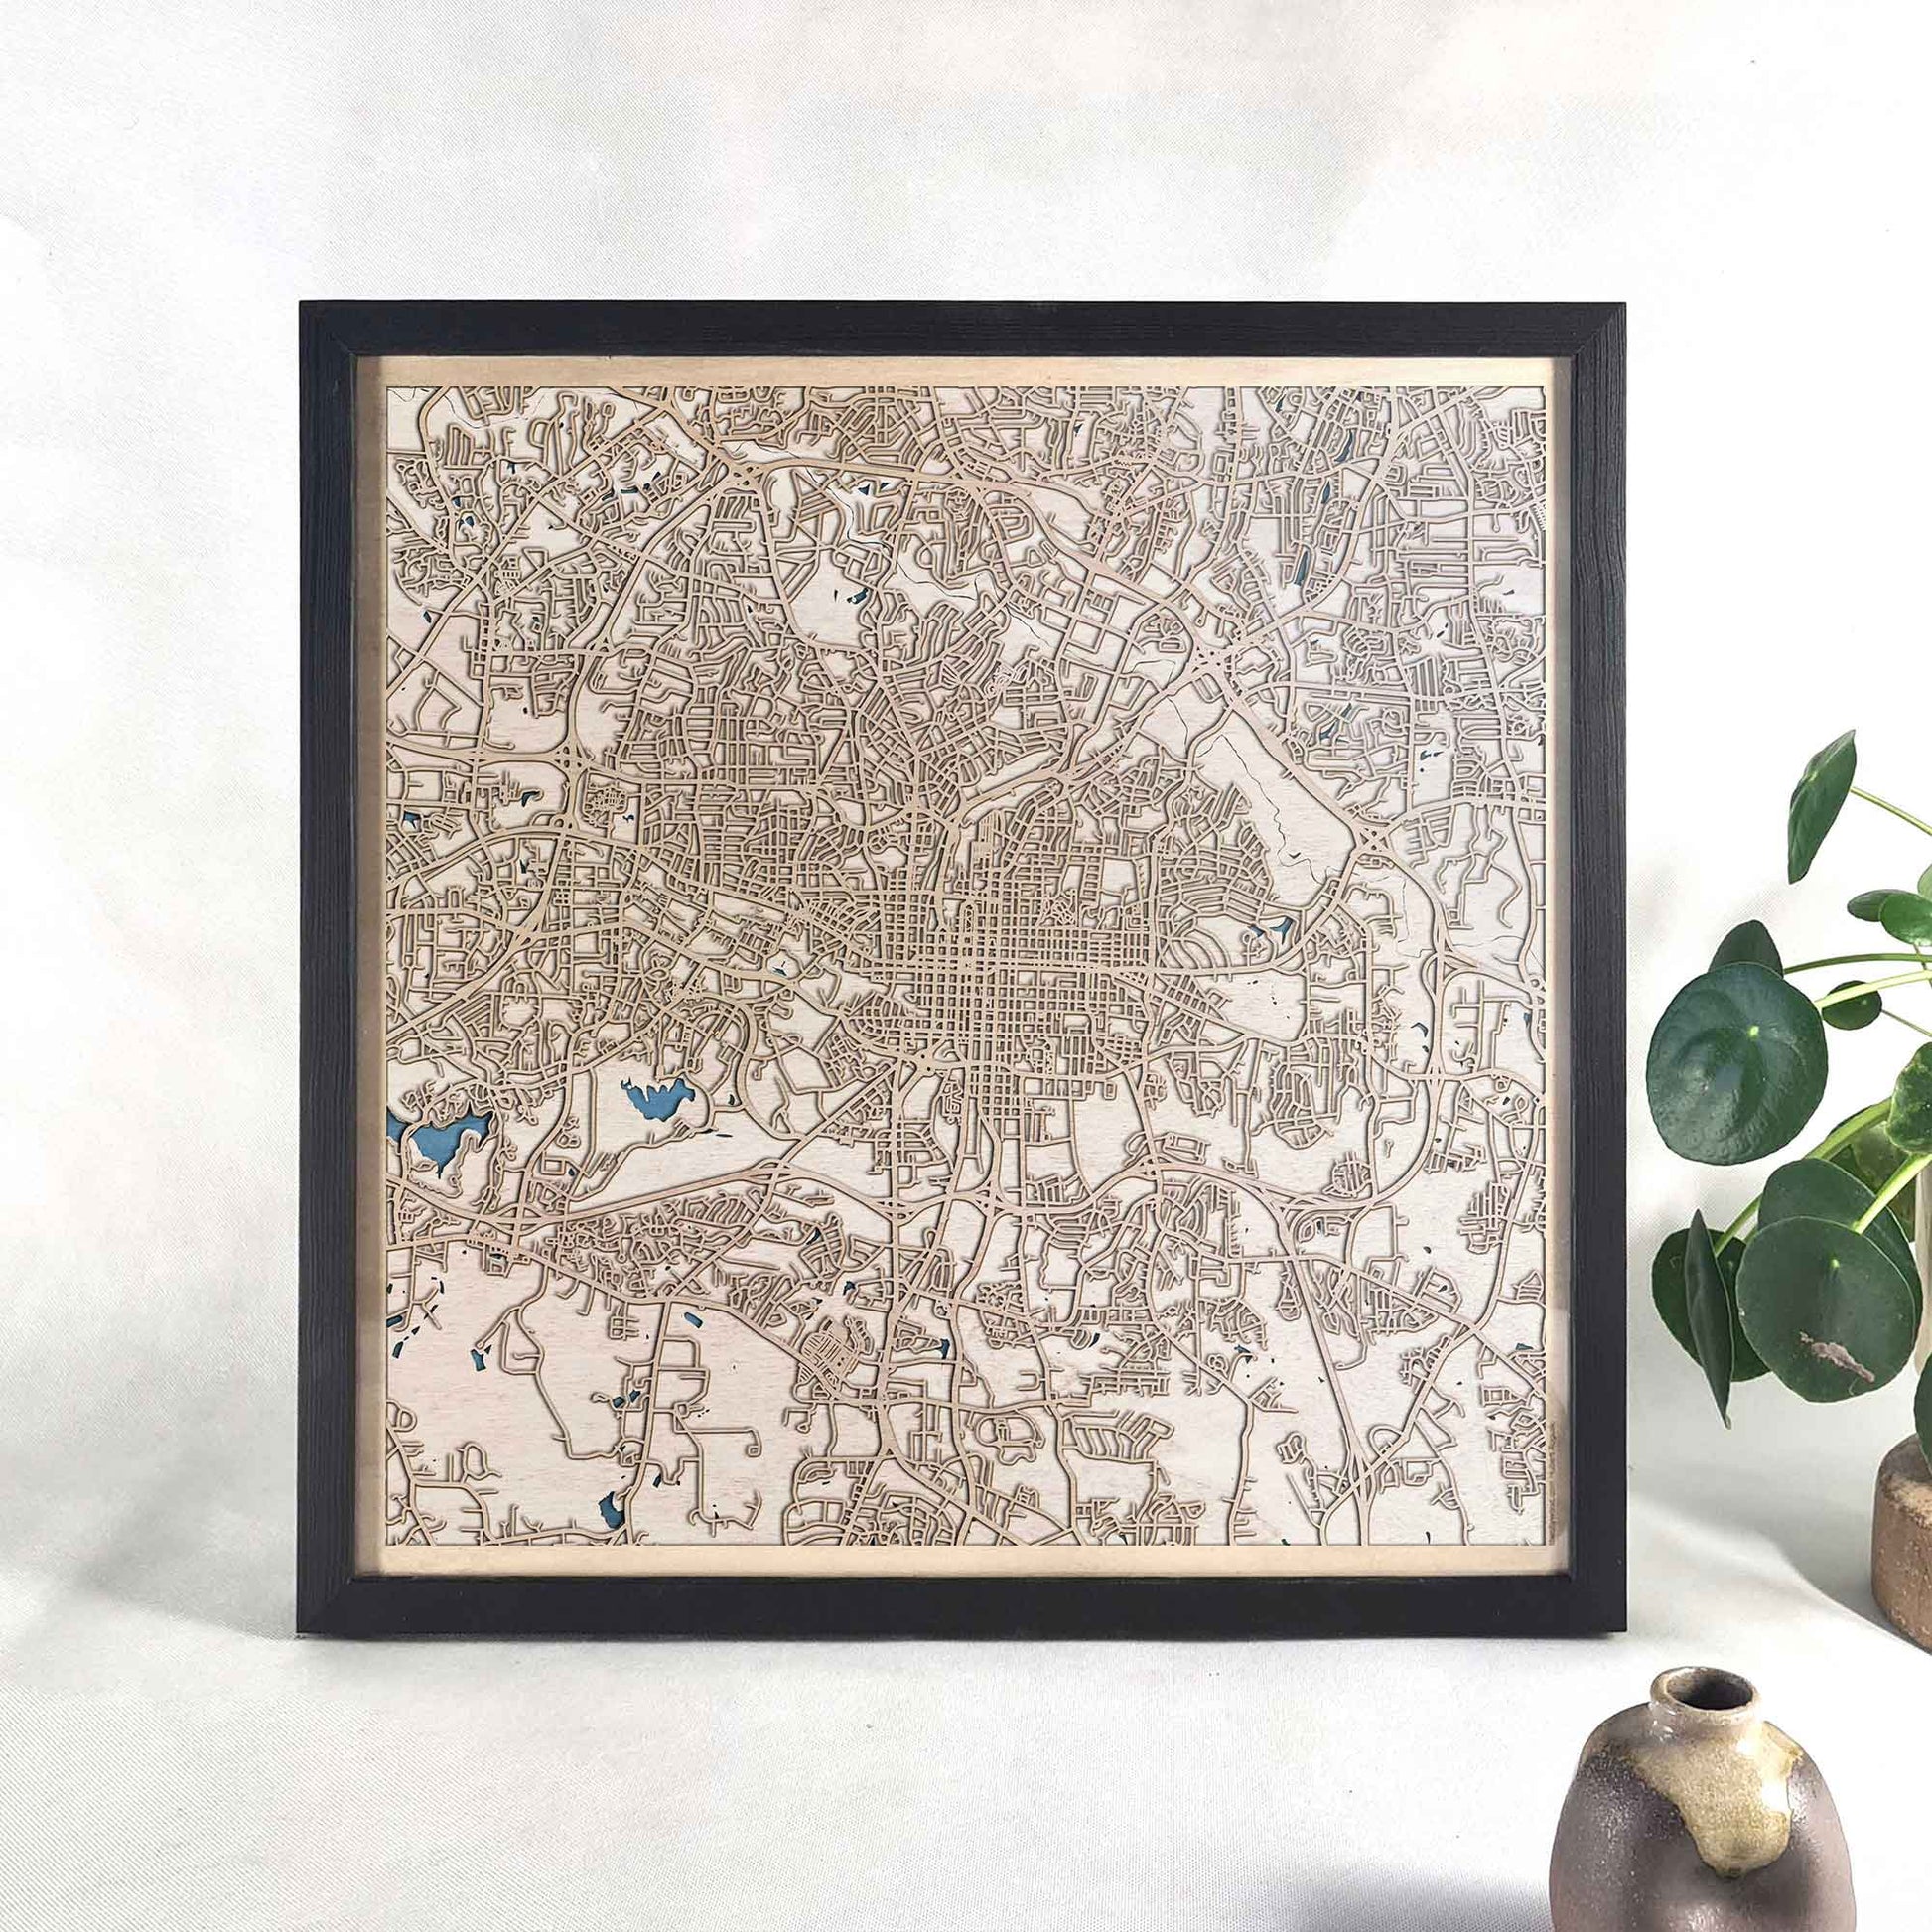 Raleigh Wooden Map by CityWood - Custom Wood Map Art - Unique Laser Cut Engraved - Anniversary Gift